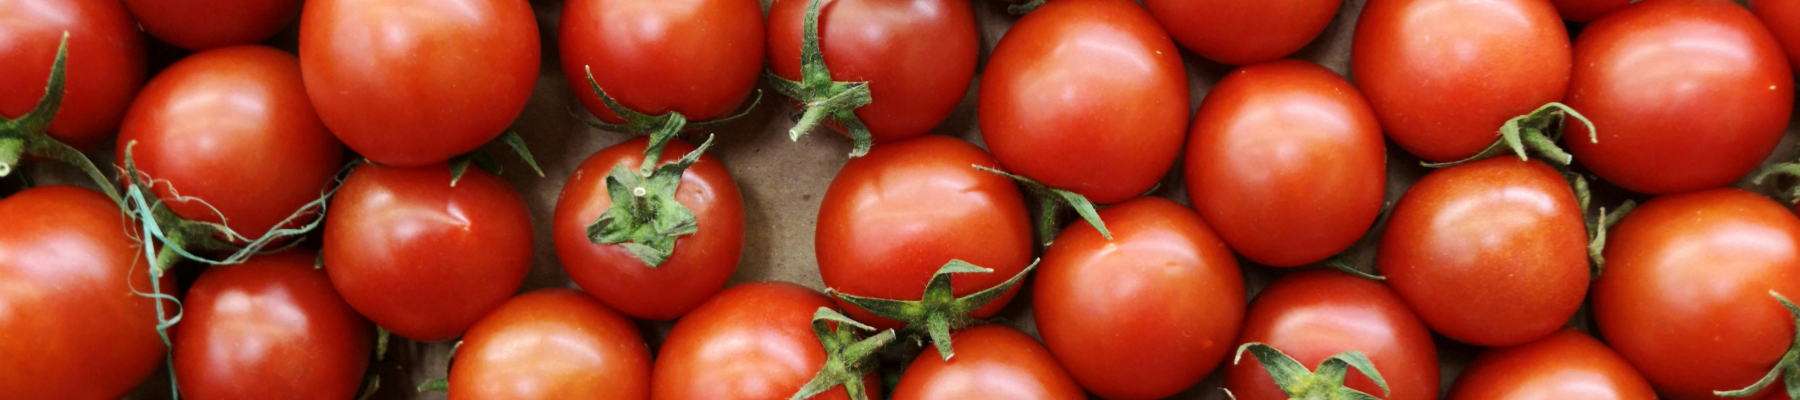 The Ultimate Guide to Harvesting, Storing, and Enjoying Your Homegrown Tomatoes